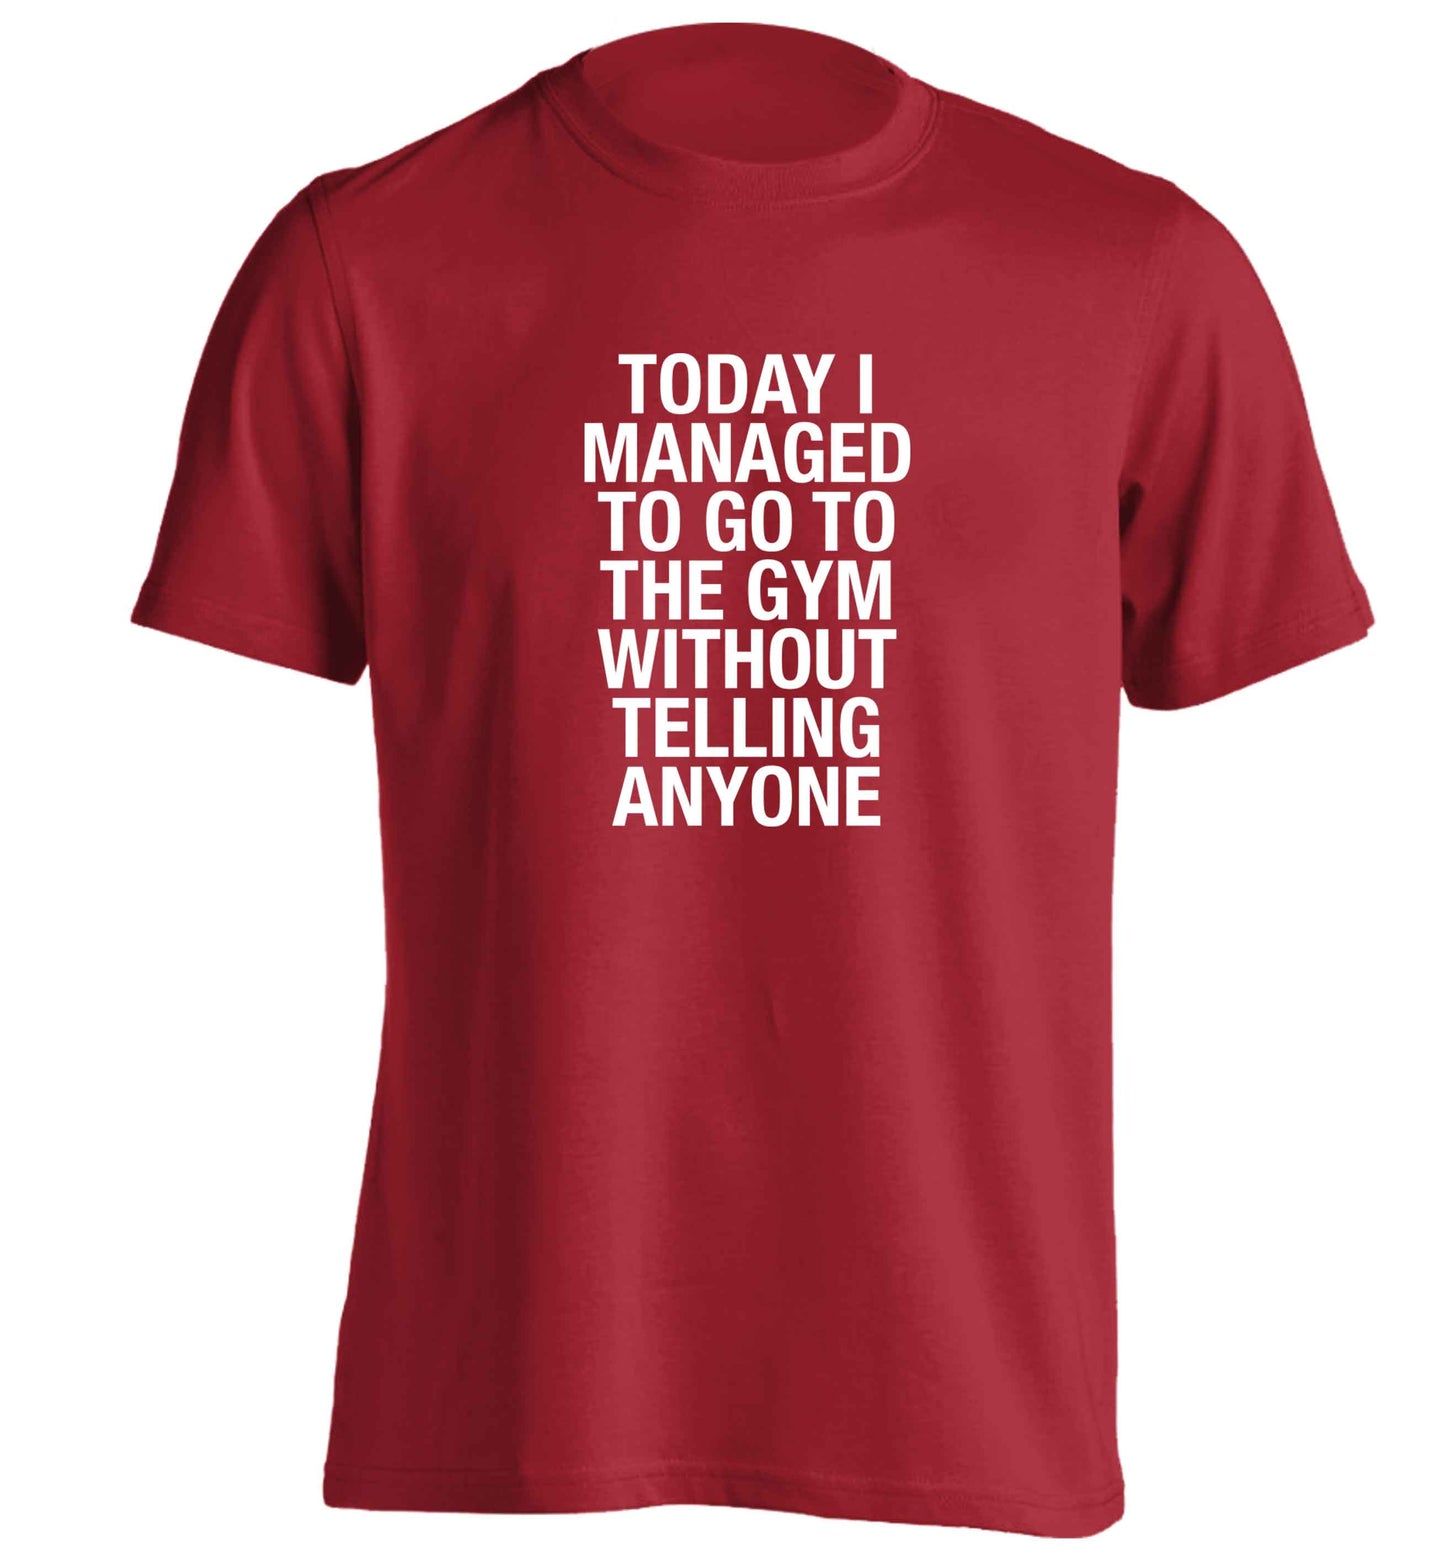 Today I managed to go to the gym without telling anyone adults unisex red Tshirt 2XL